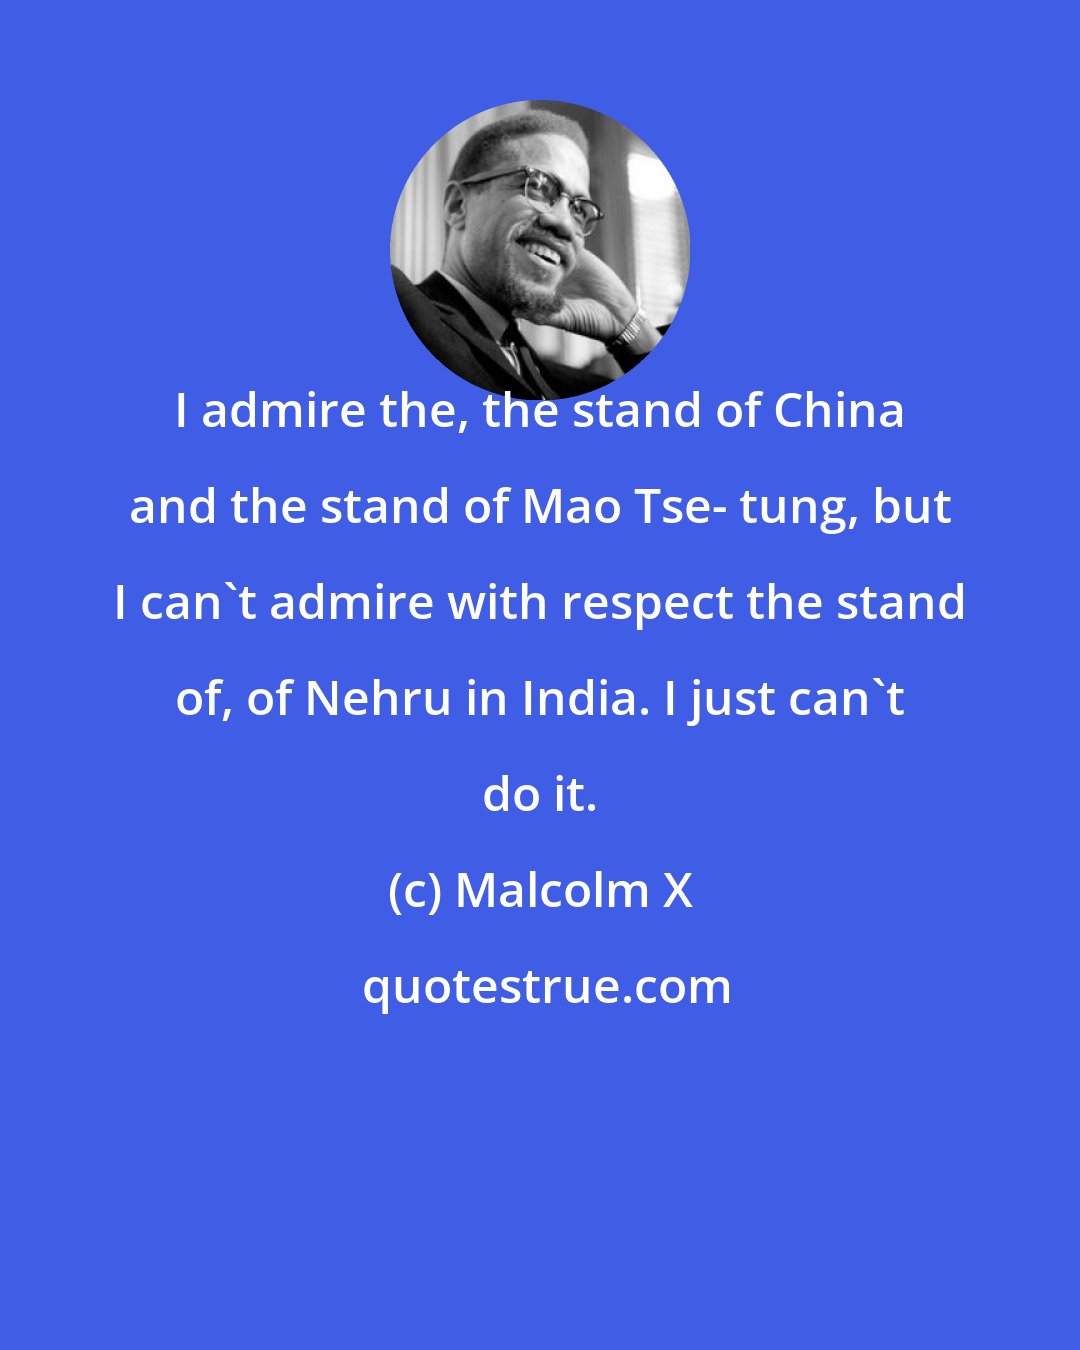 Malcolm X: I admire the, the stand of China and the stand of Mao Tse- tung, but I can't admire with respect the stand of, of Nehru in India. I just can't do it.